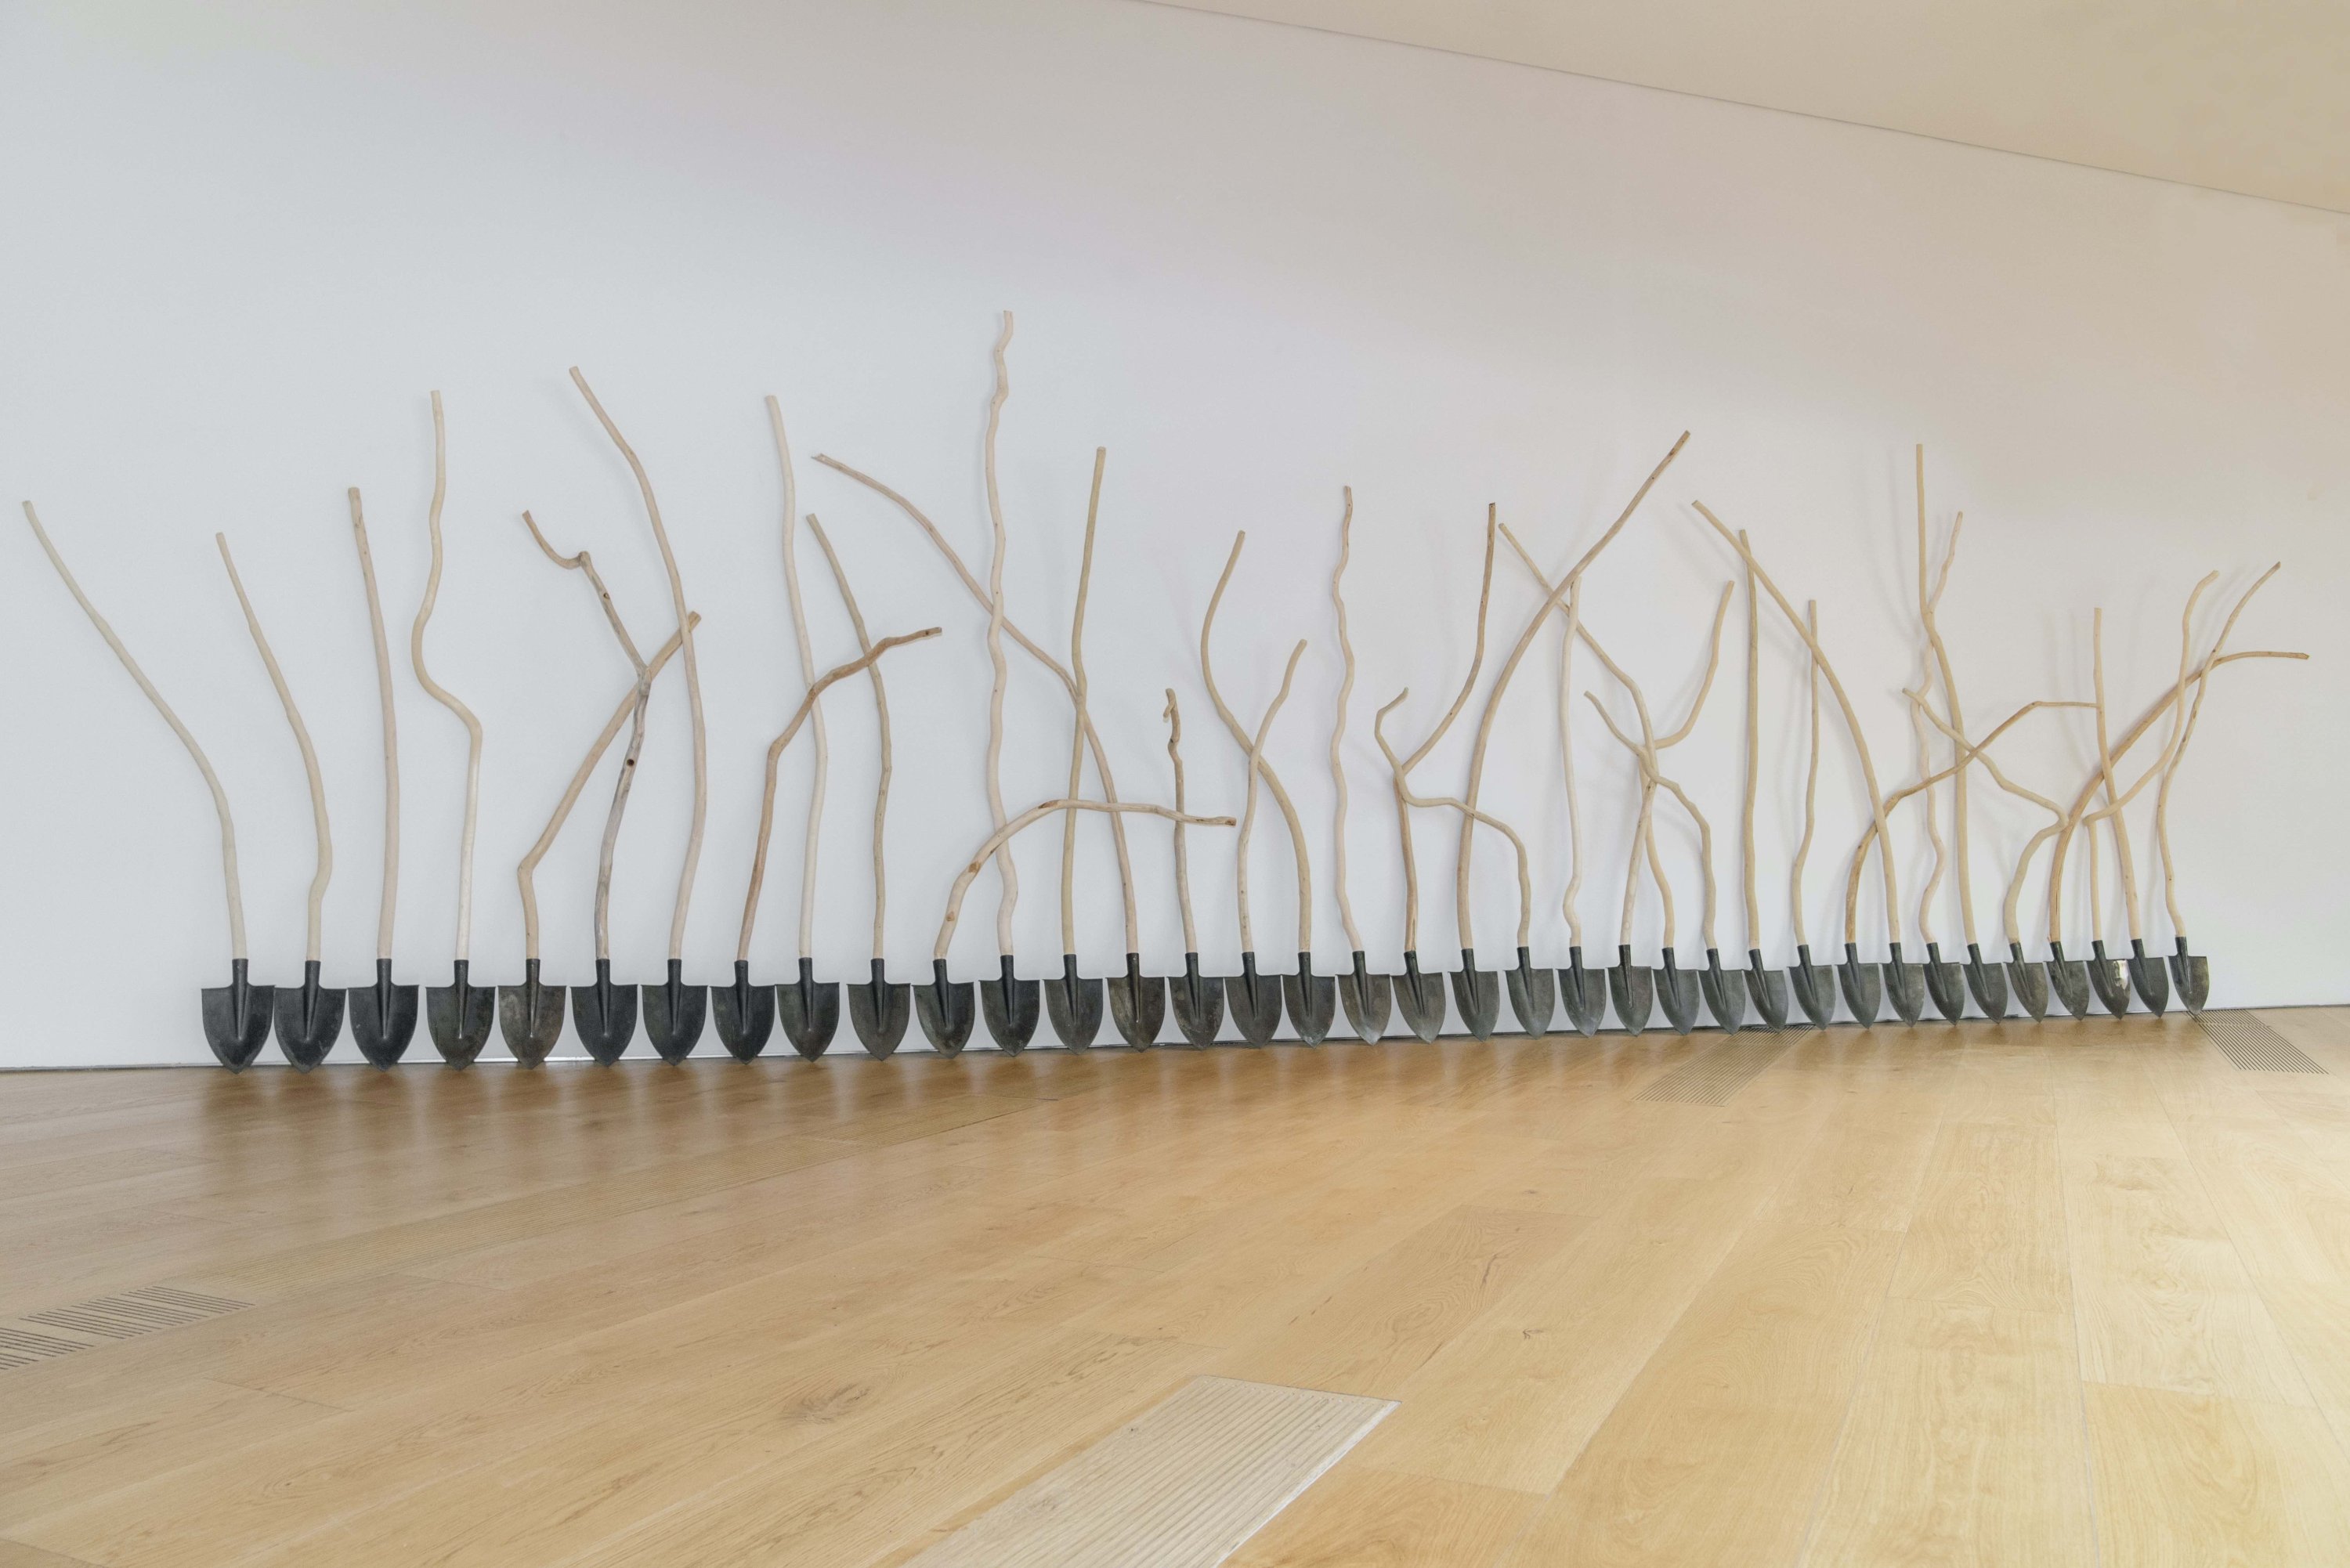 Ali Ibrahim Öcal, 'Untitled,' installation with 38 tree branches and shovels without handles, variable sizes, 2017.